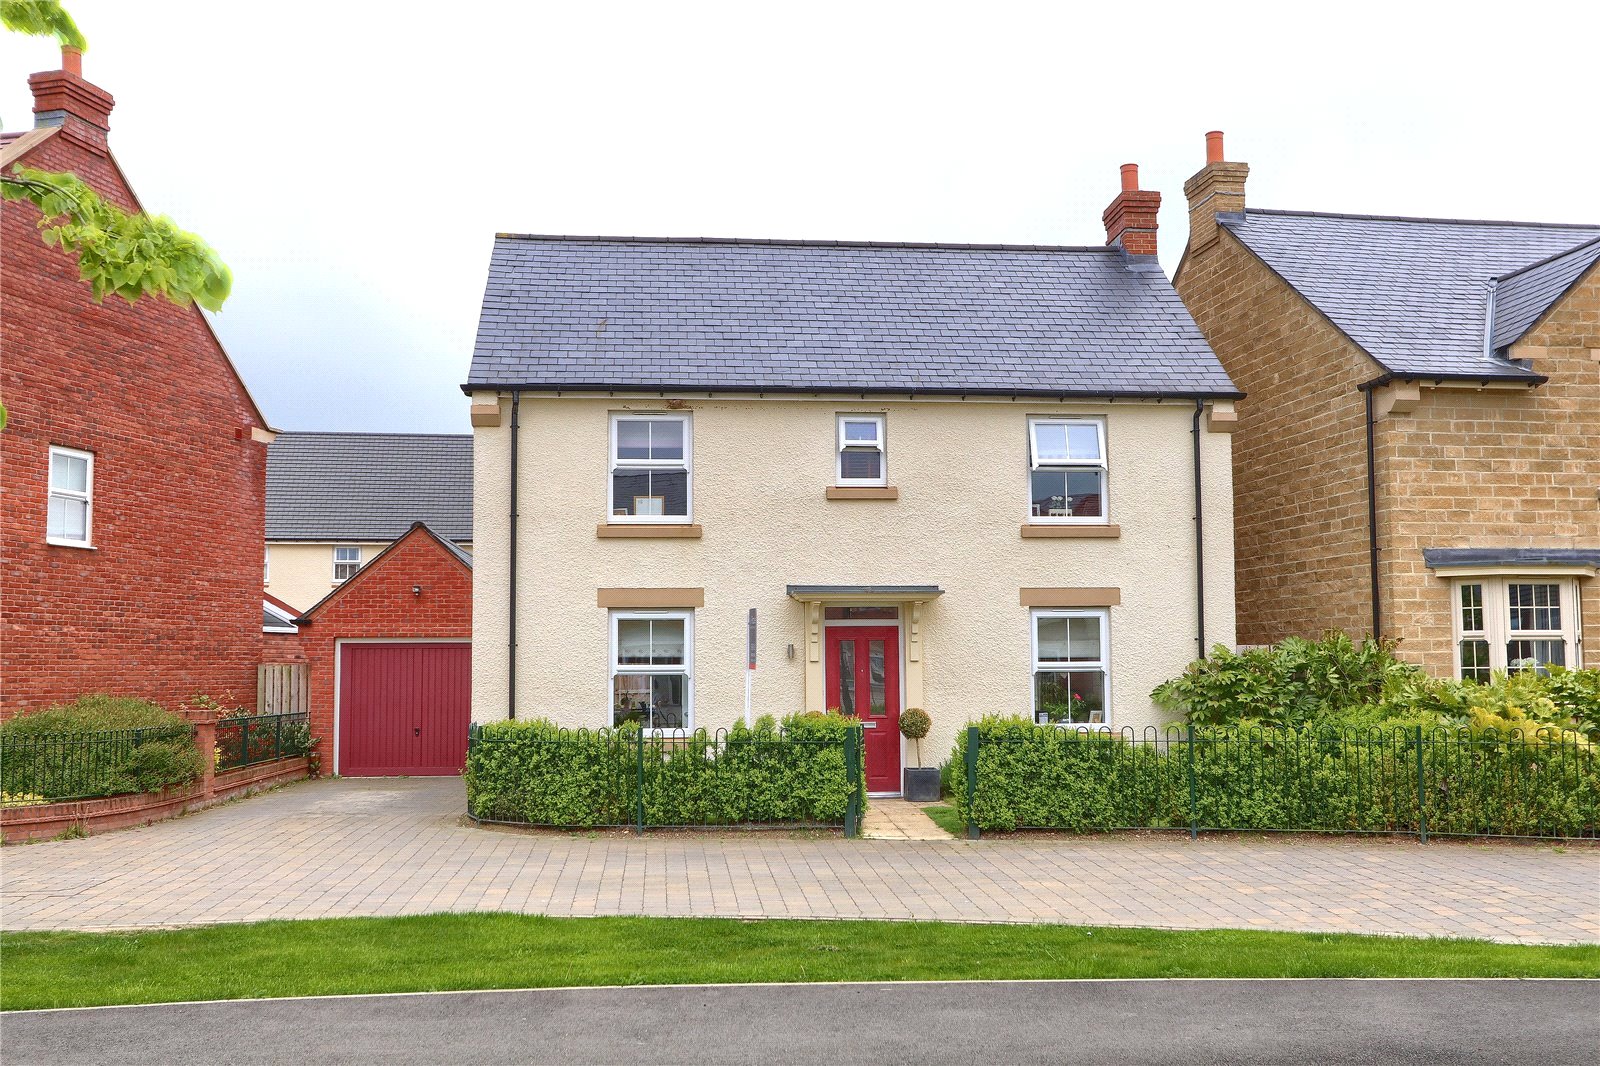 3 bed house for sale in Ellerbeck Avenue, Grey Towers Village - Property Image 1